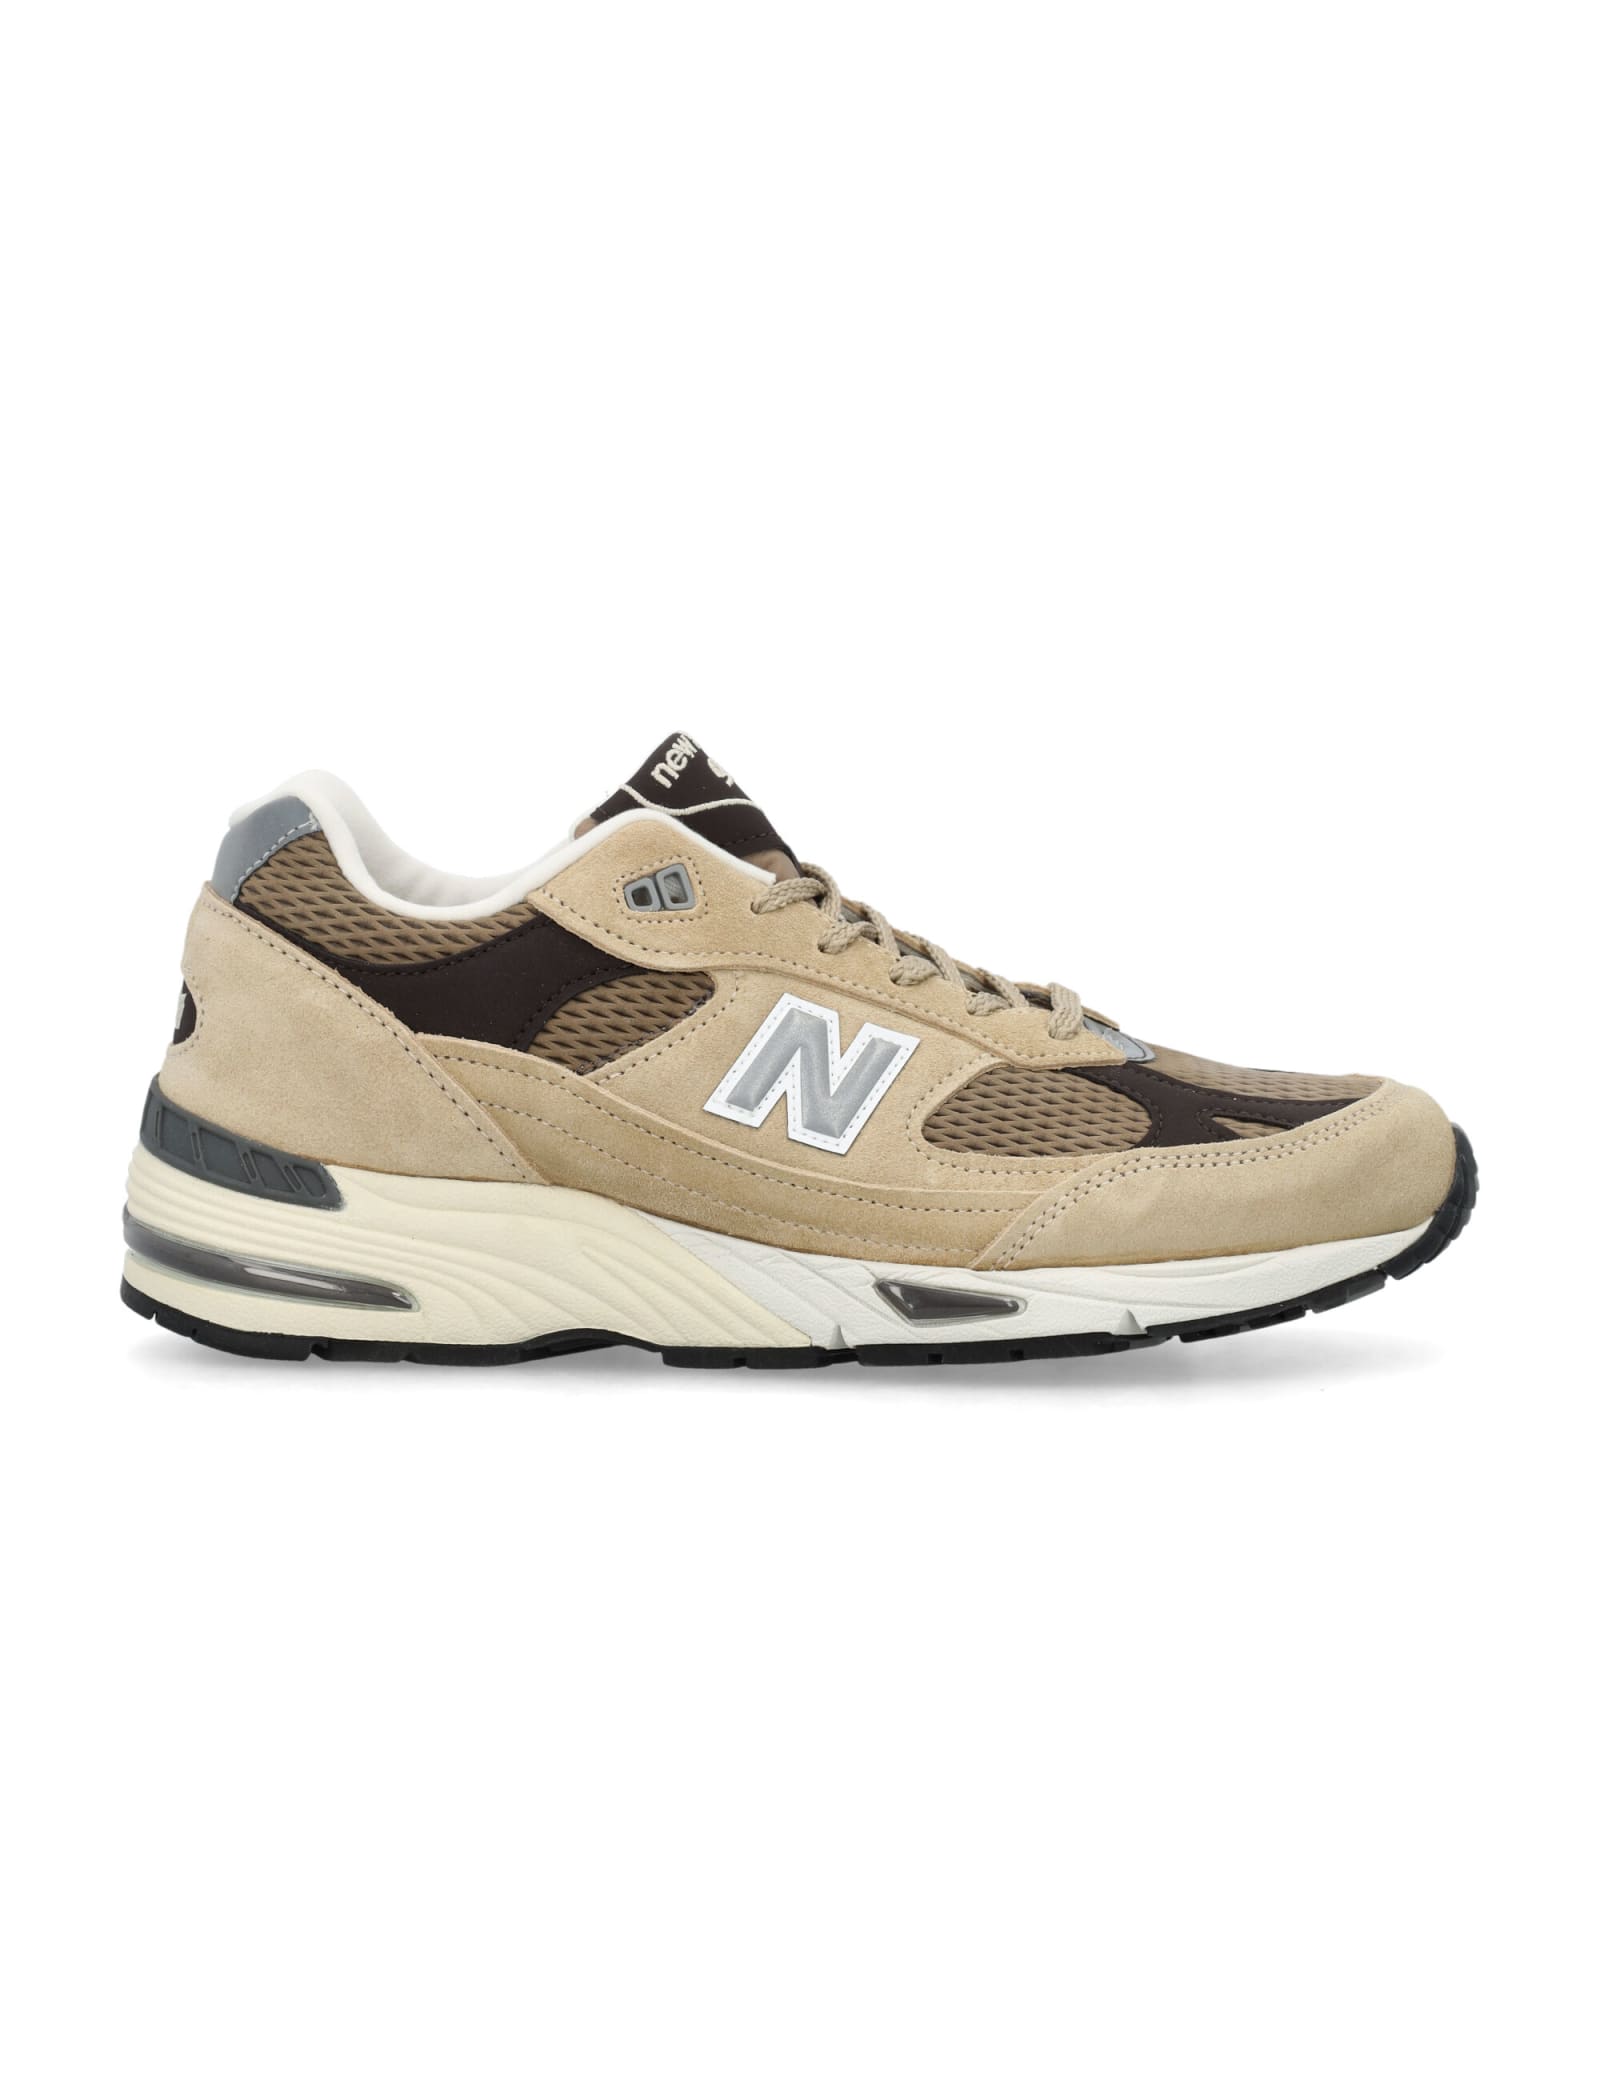 NEW BALANCE MADE IN UK 991 V1 FINALE